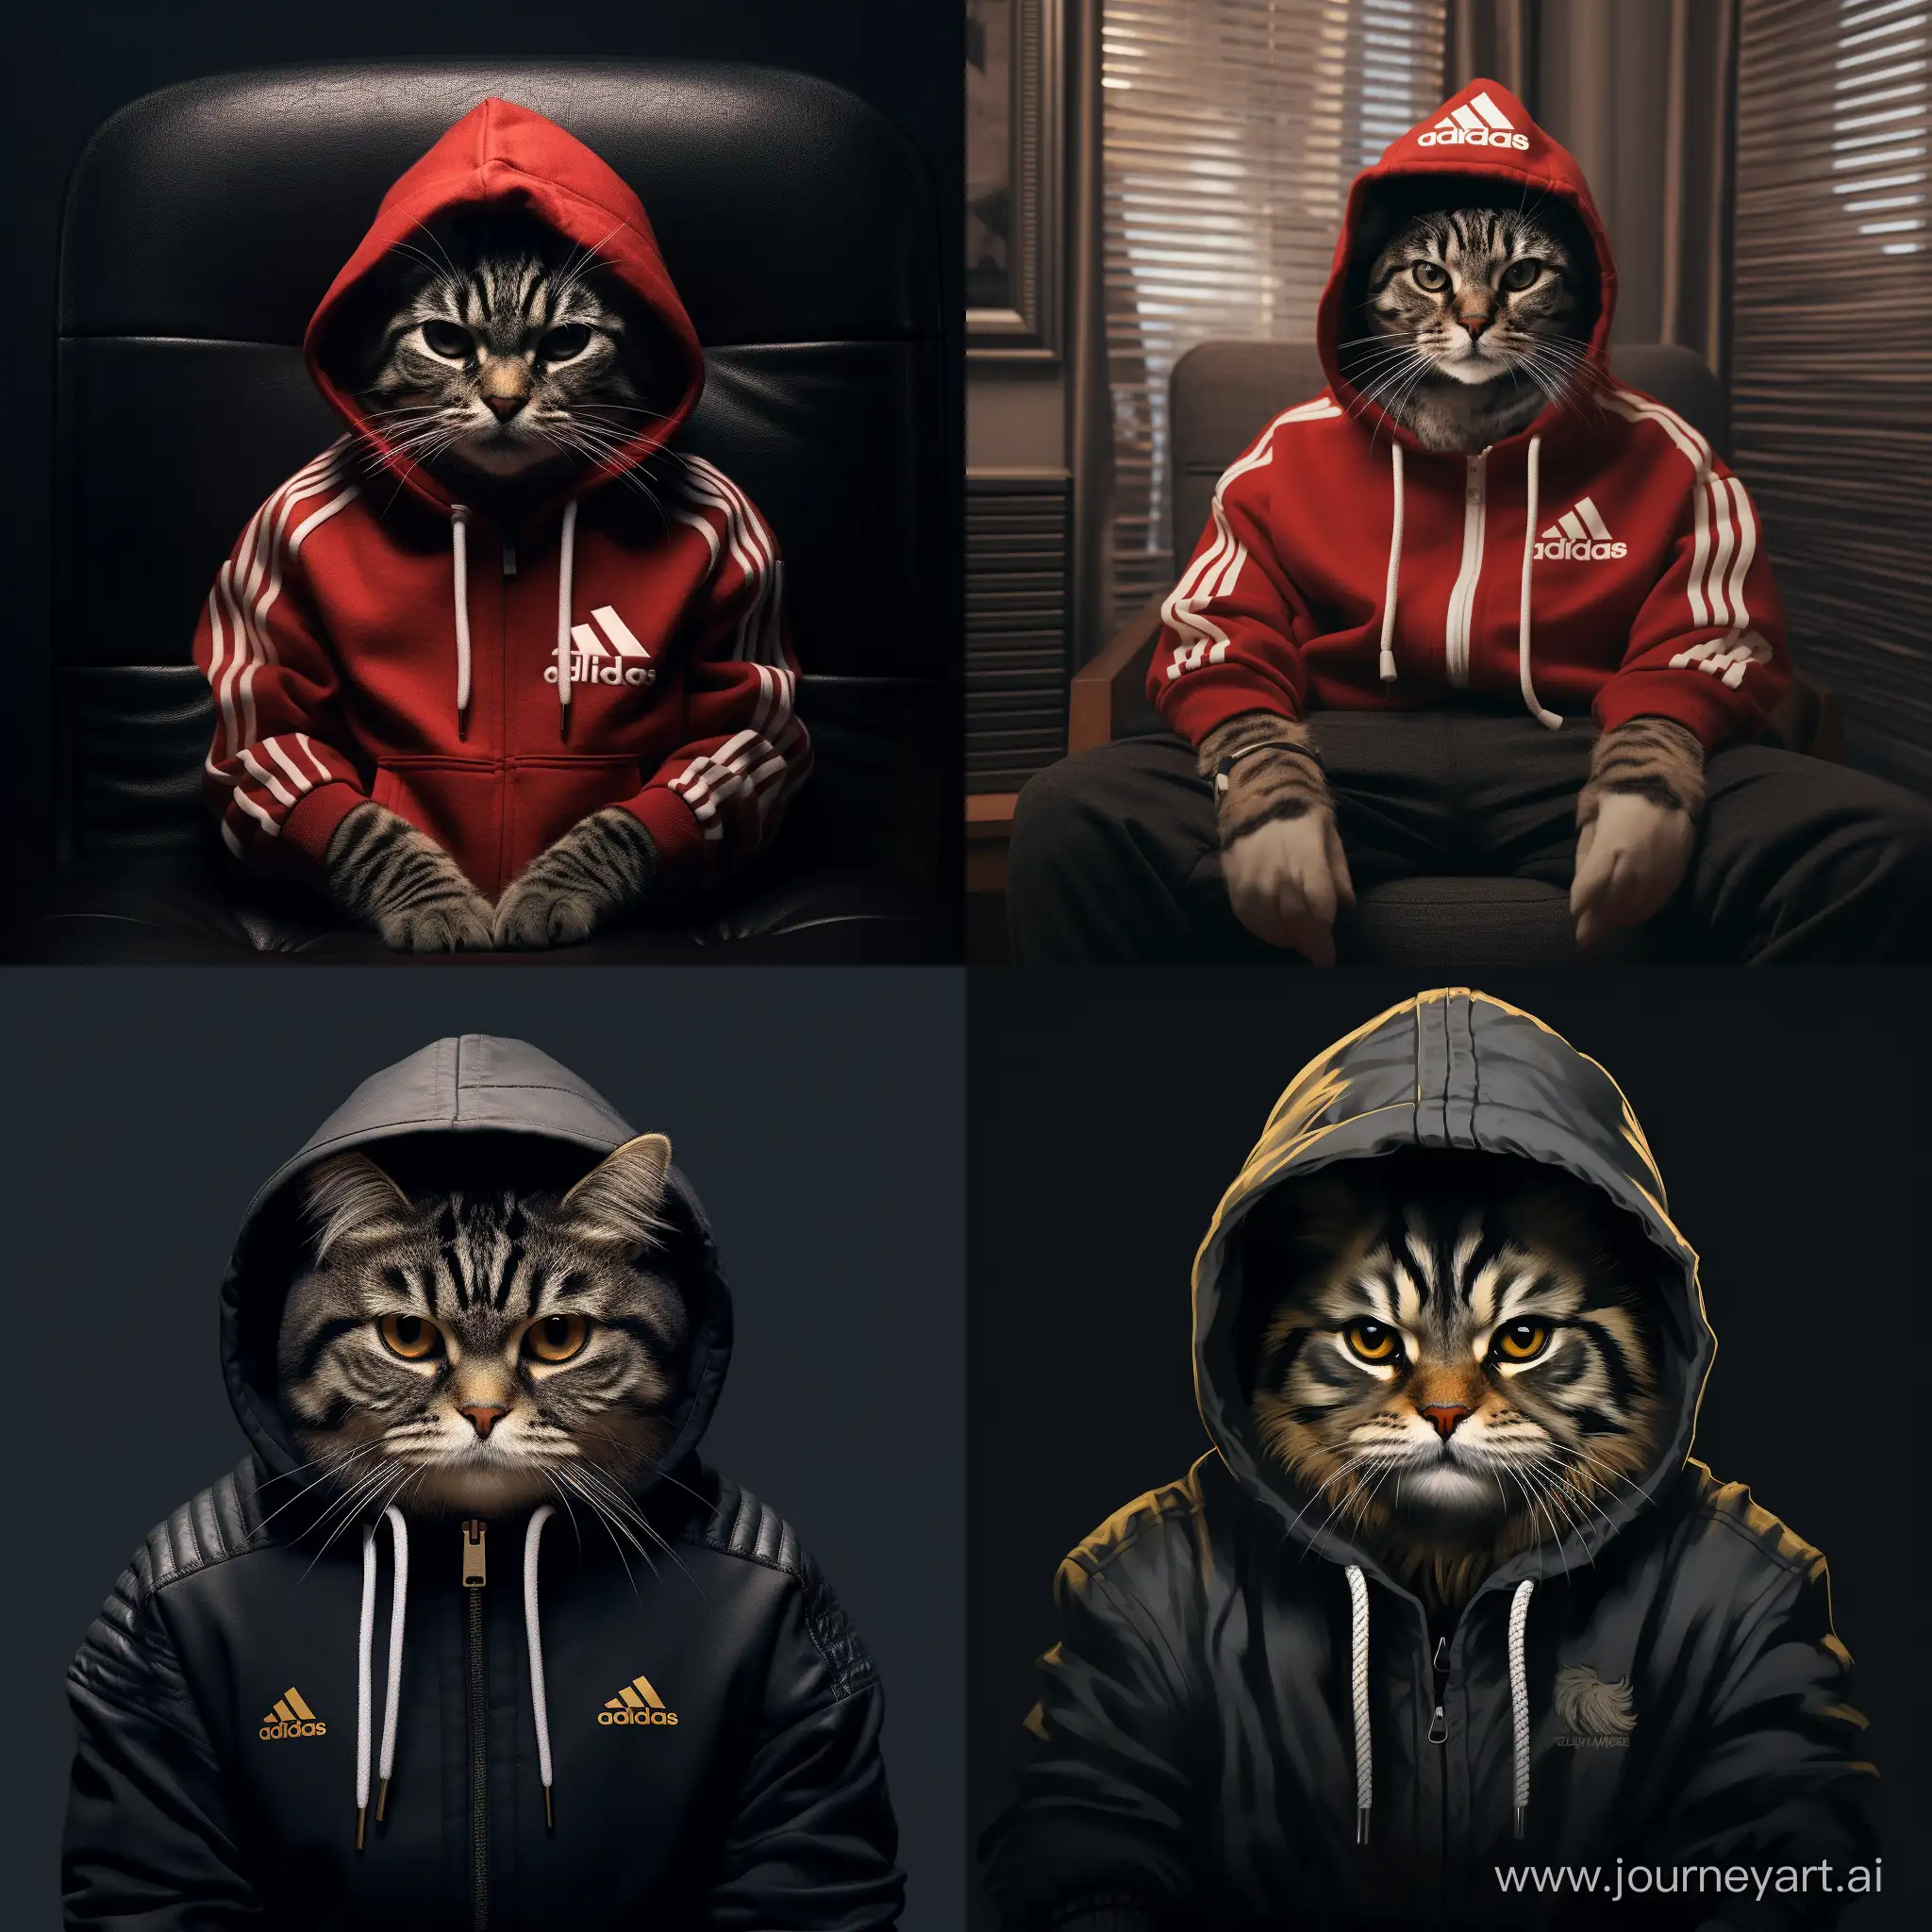 Fashionable-Feline-Swagger-Cat-in-Adidas-Sweatshirt-Poses-with-Gangster-Vibes